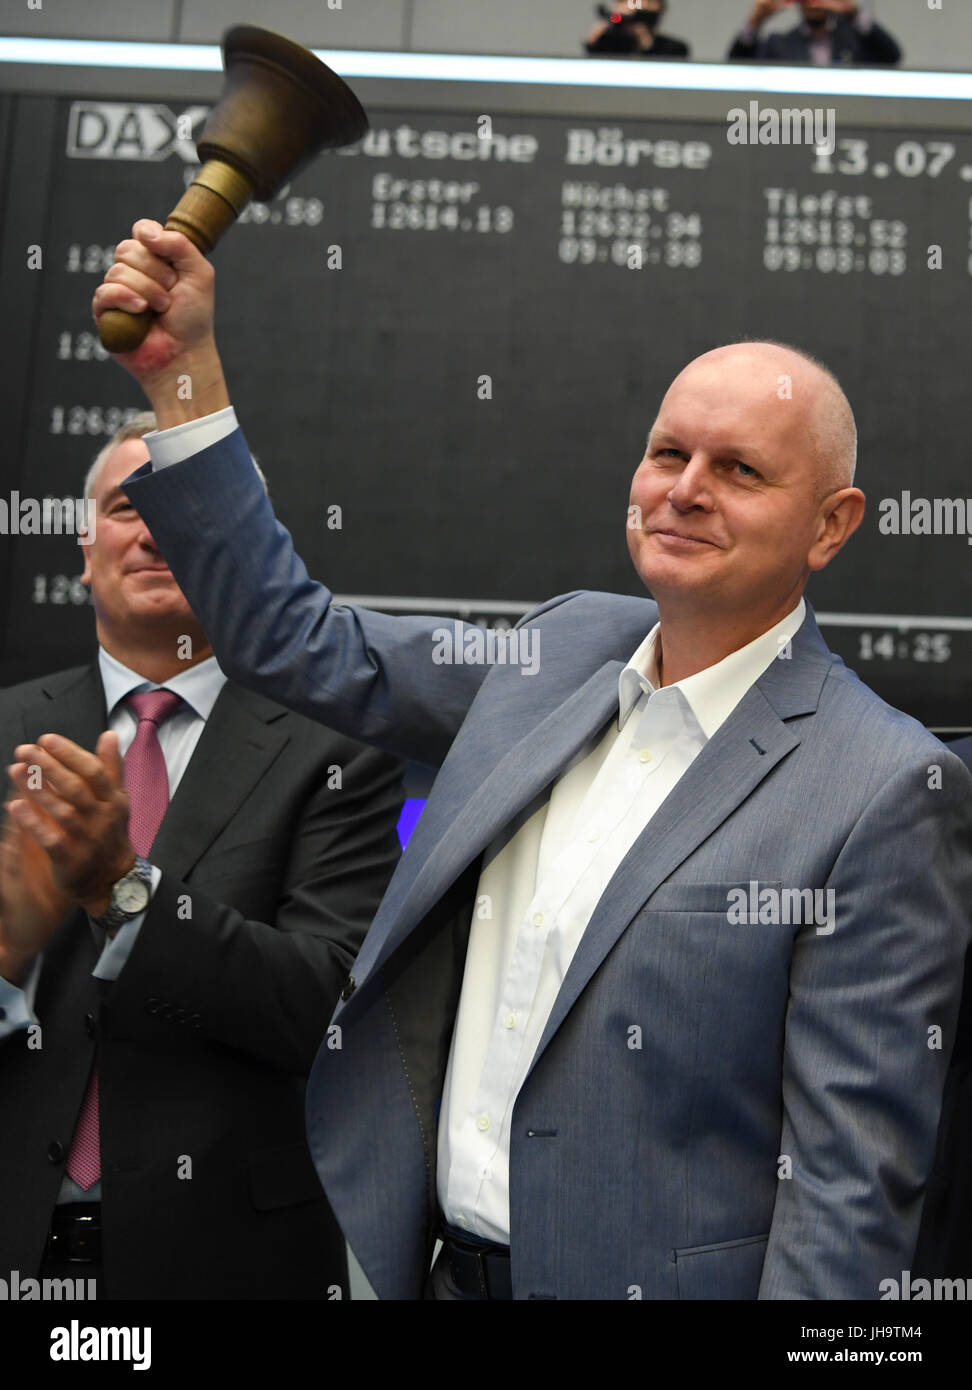 Frankfurt, Germany. 13th Jul, 2017. Olaf Koch (C), CEO of der Metro Wholesale & Food Specialist AG, rings the stock exchange bell beside Gregor Pottmeyer (l), CFO of Deutsche Boerse AG, during the flotation of the new Metro on the trading floor at the stock exchange in Frankfurt am Main, Germany, 13 July 2017. Credit: dpa picture alliance/Alamy Live News Stock Photo